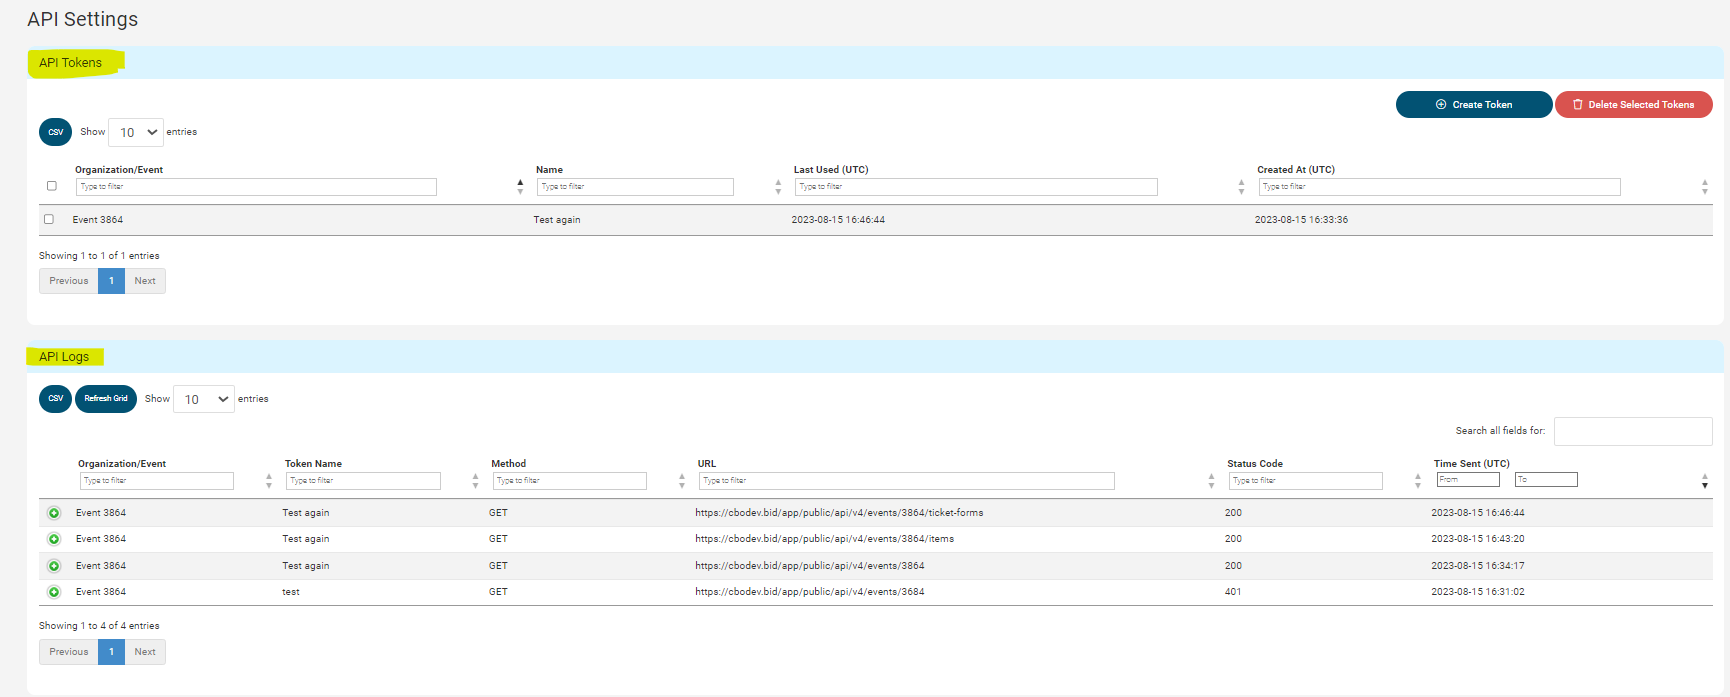 View the API logs and download CSV reports.